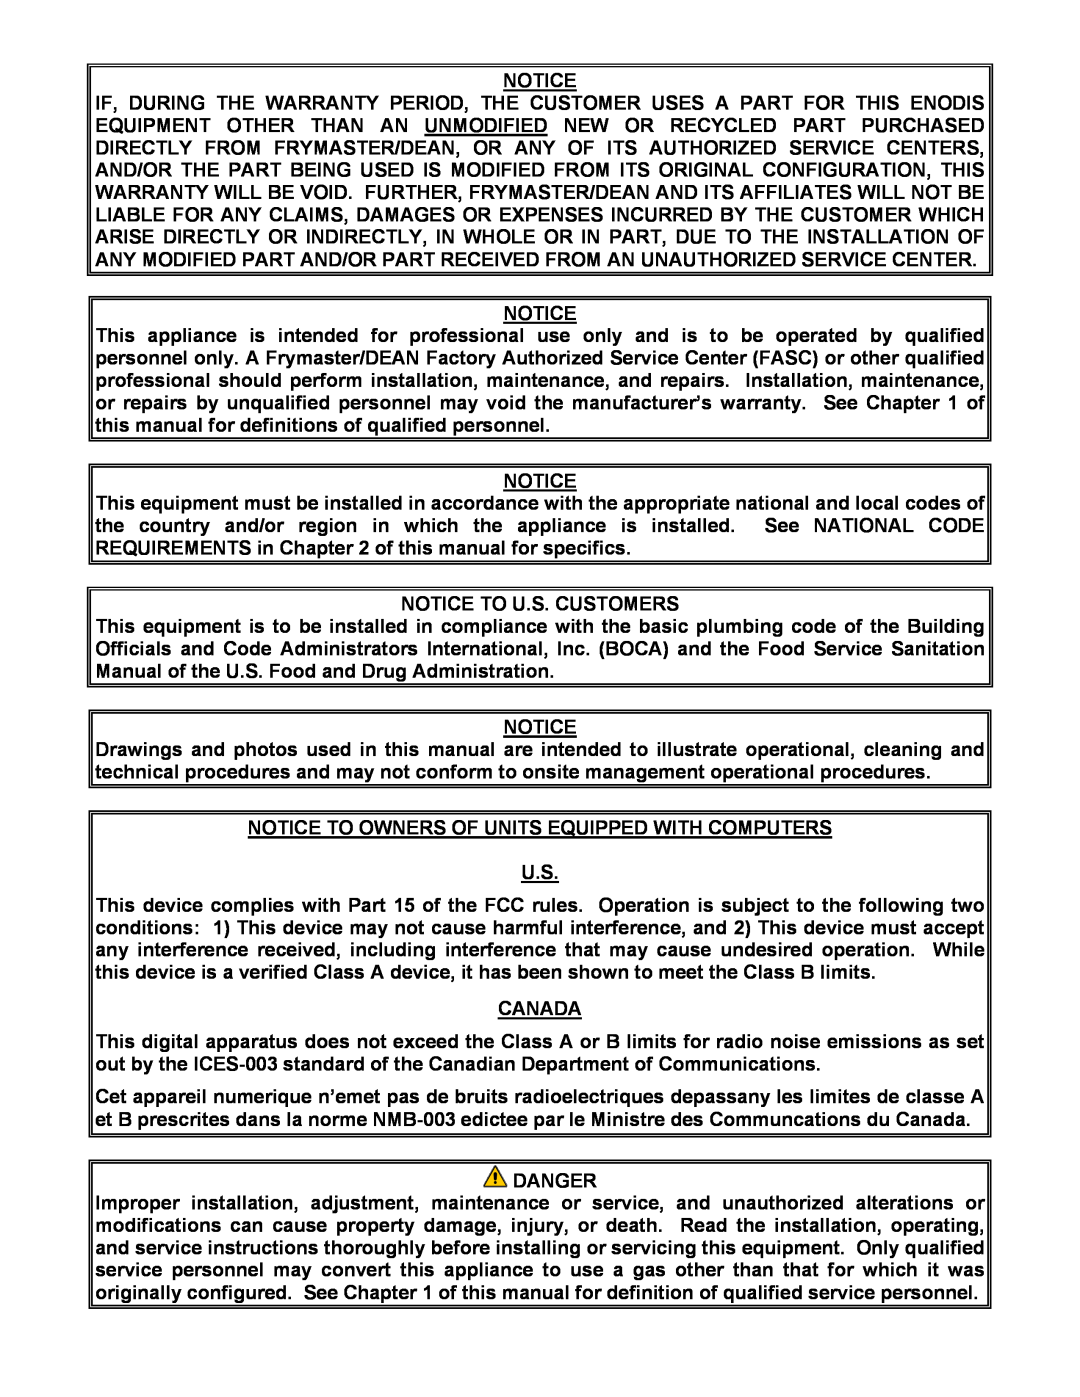 Frymaster FBCR18 manual Notice To U.S. Customers, Notice To Owners Of Units Equipped With Computers U.S, Canada, Danger 